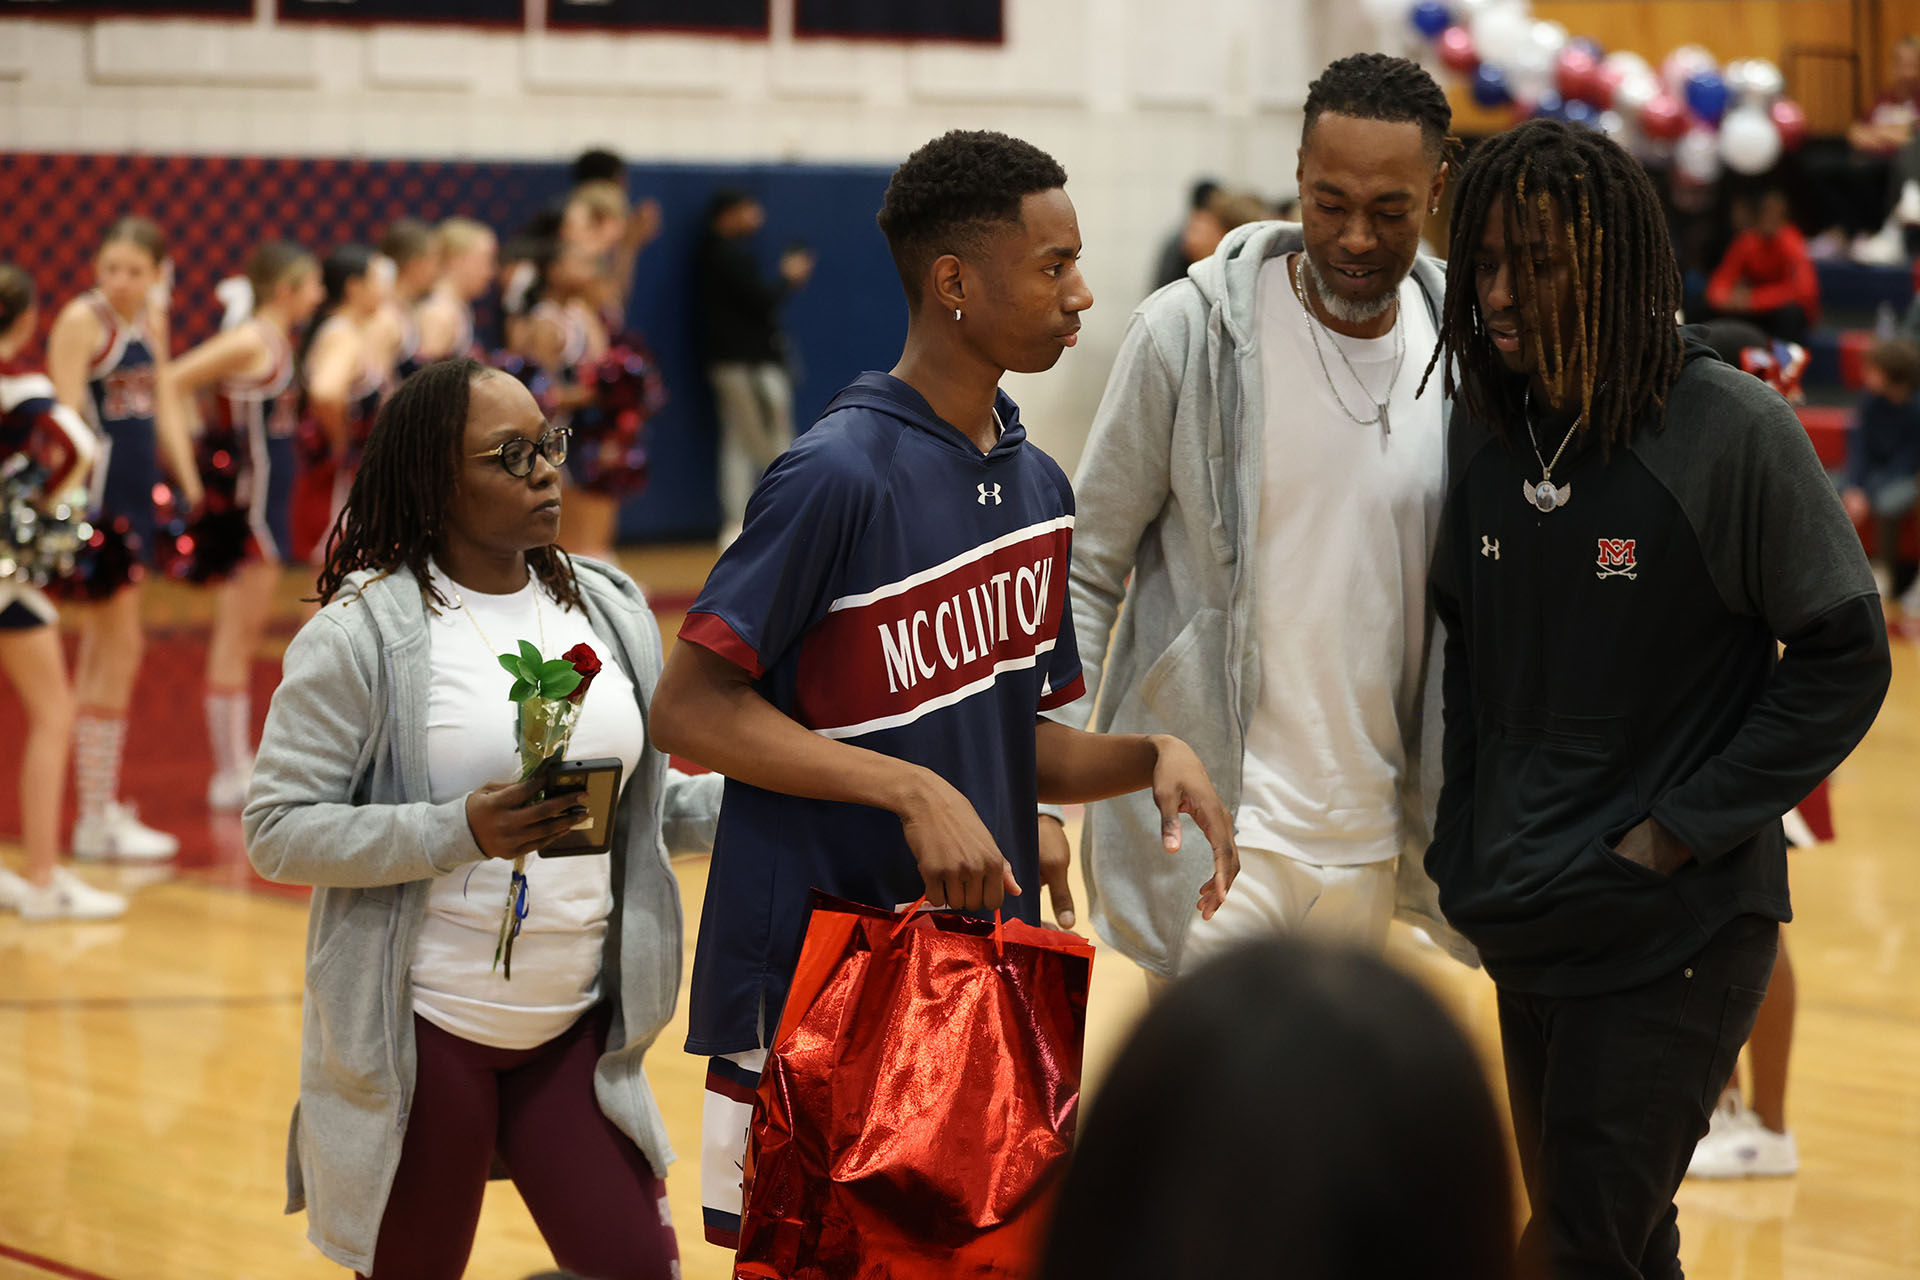 Khai Strong and his family on senior night